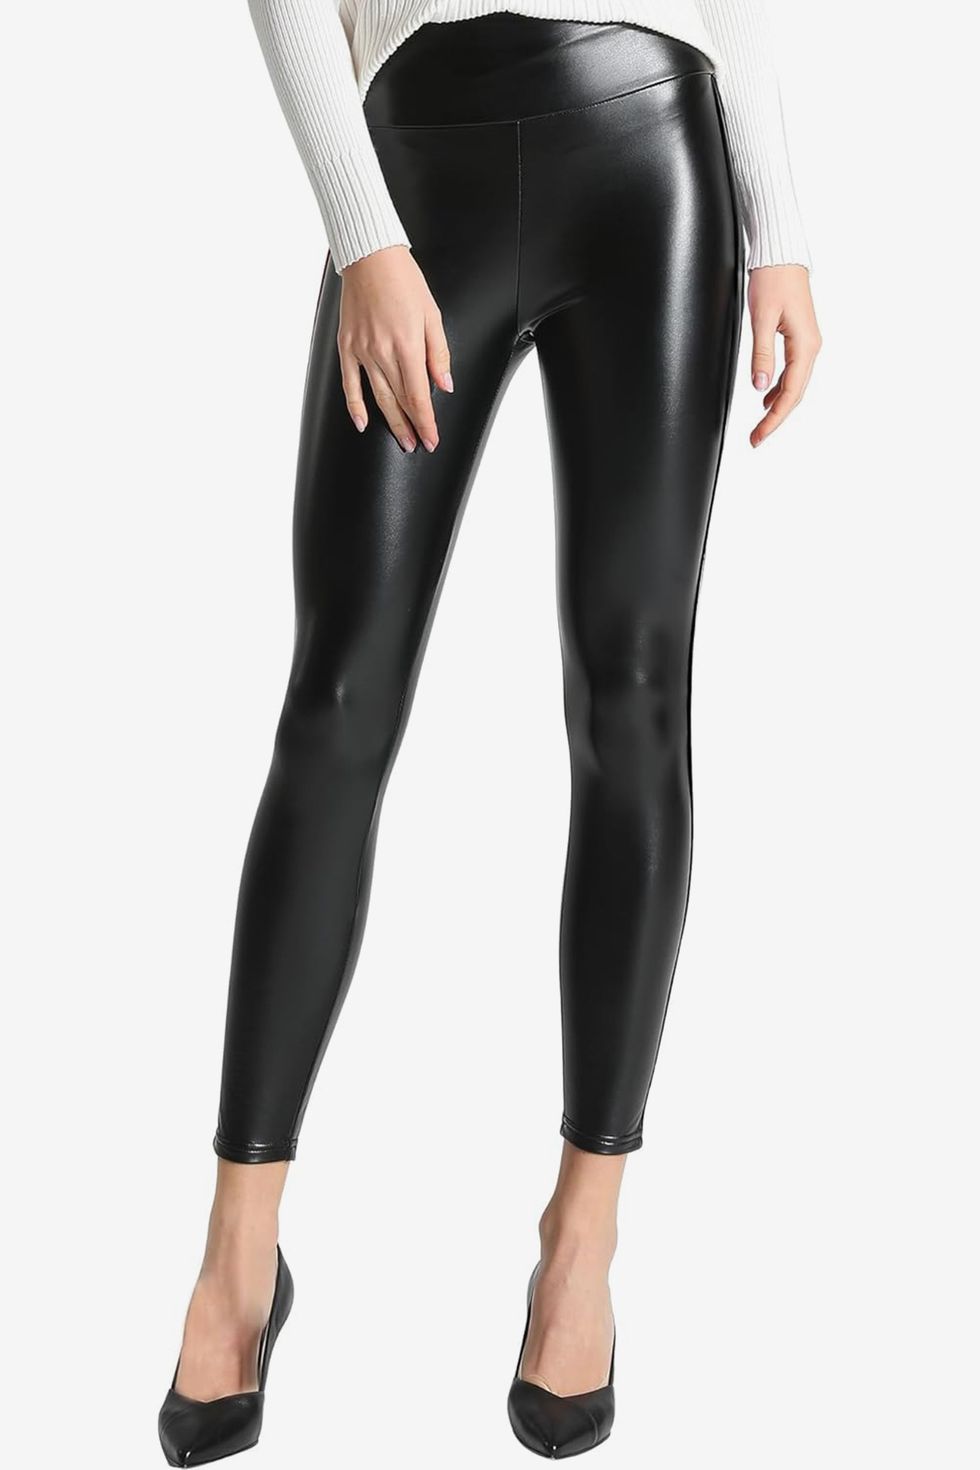 Stretchy Faux Leather Leggings